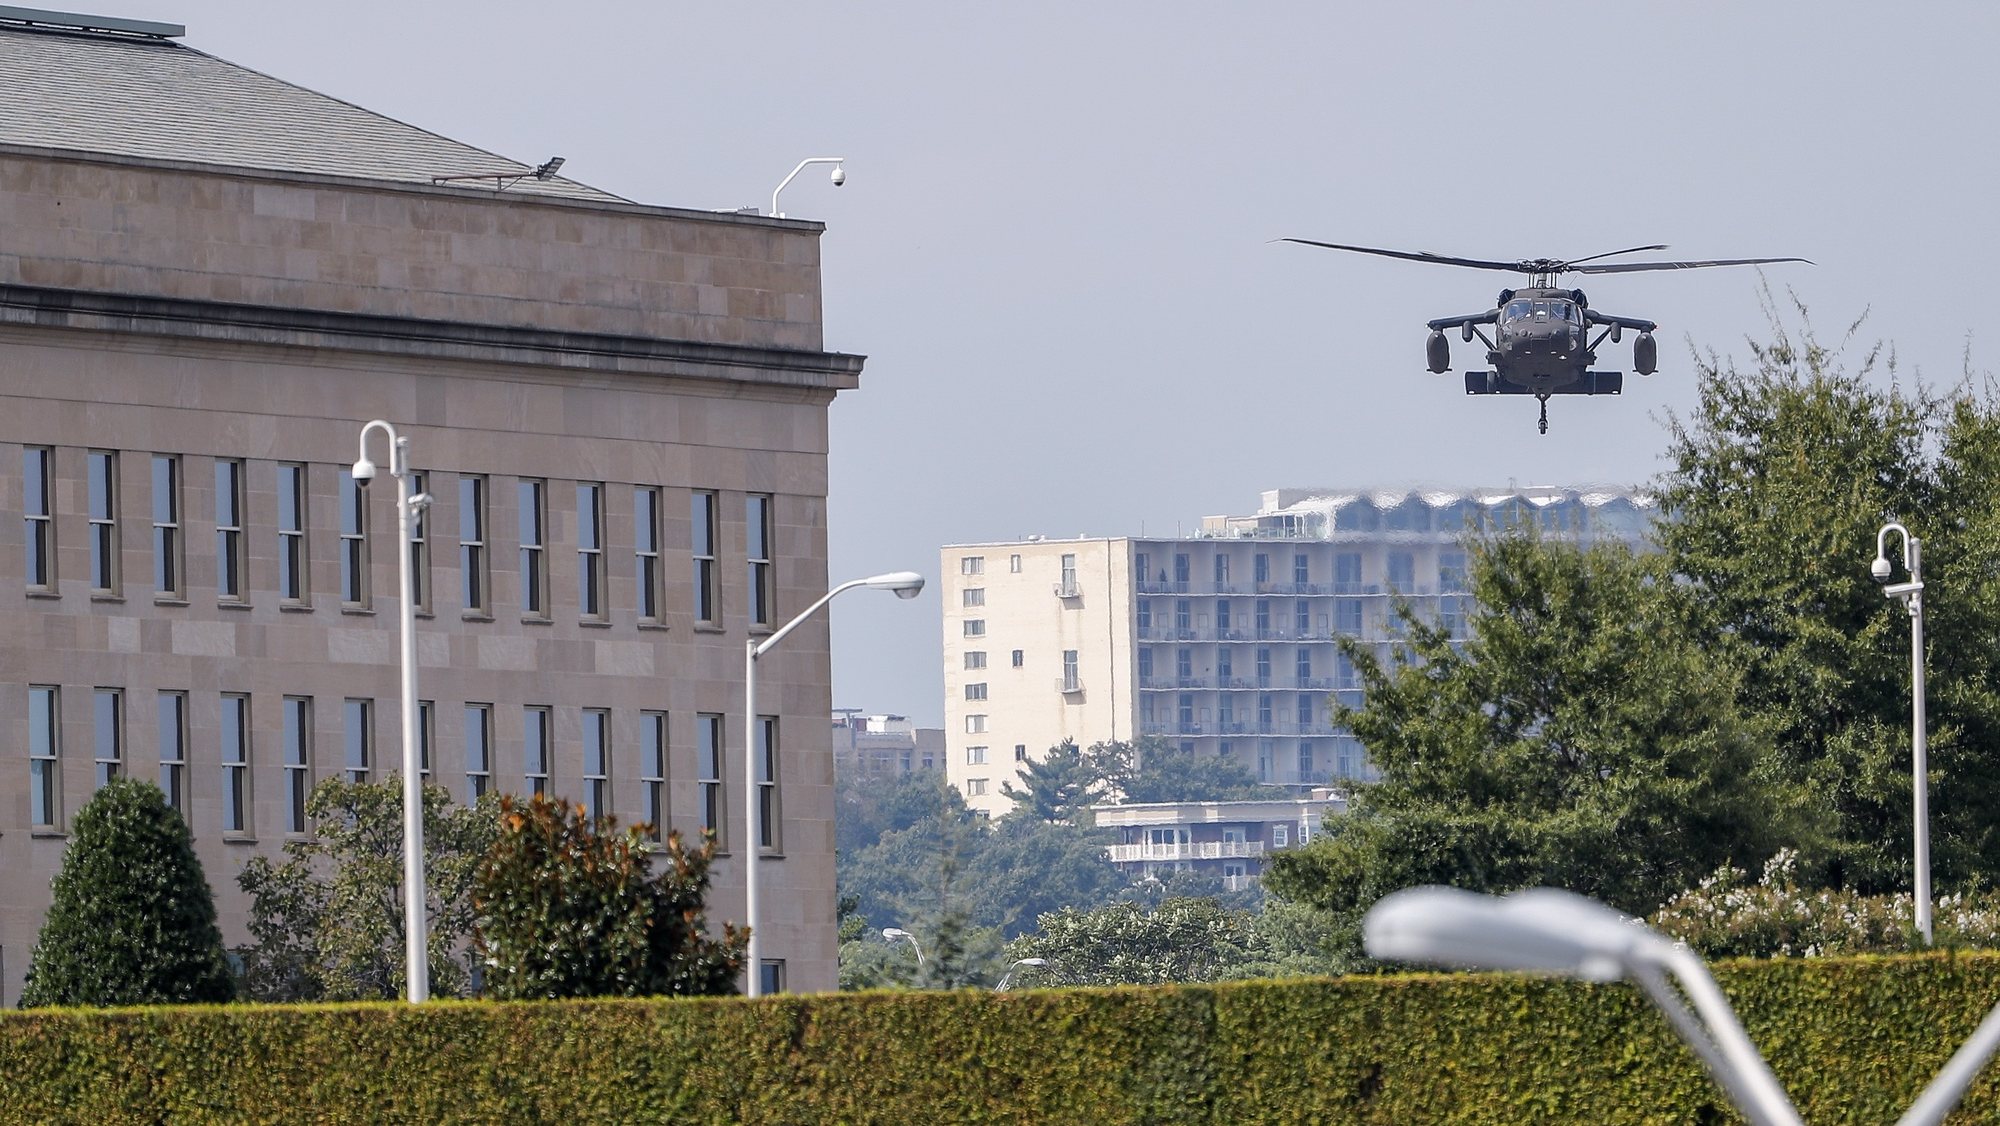 epa07064640 A military helicopter lands outside the Pentagon building in Arlington, Virgina, USA, 02 October 2018. Two pieces of mail delivered to the Pentagon mail facility on 02 October have initially tested positive for ricin, according to US defense officials.  EPA/ERIK S. LESSER